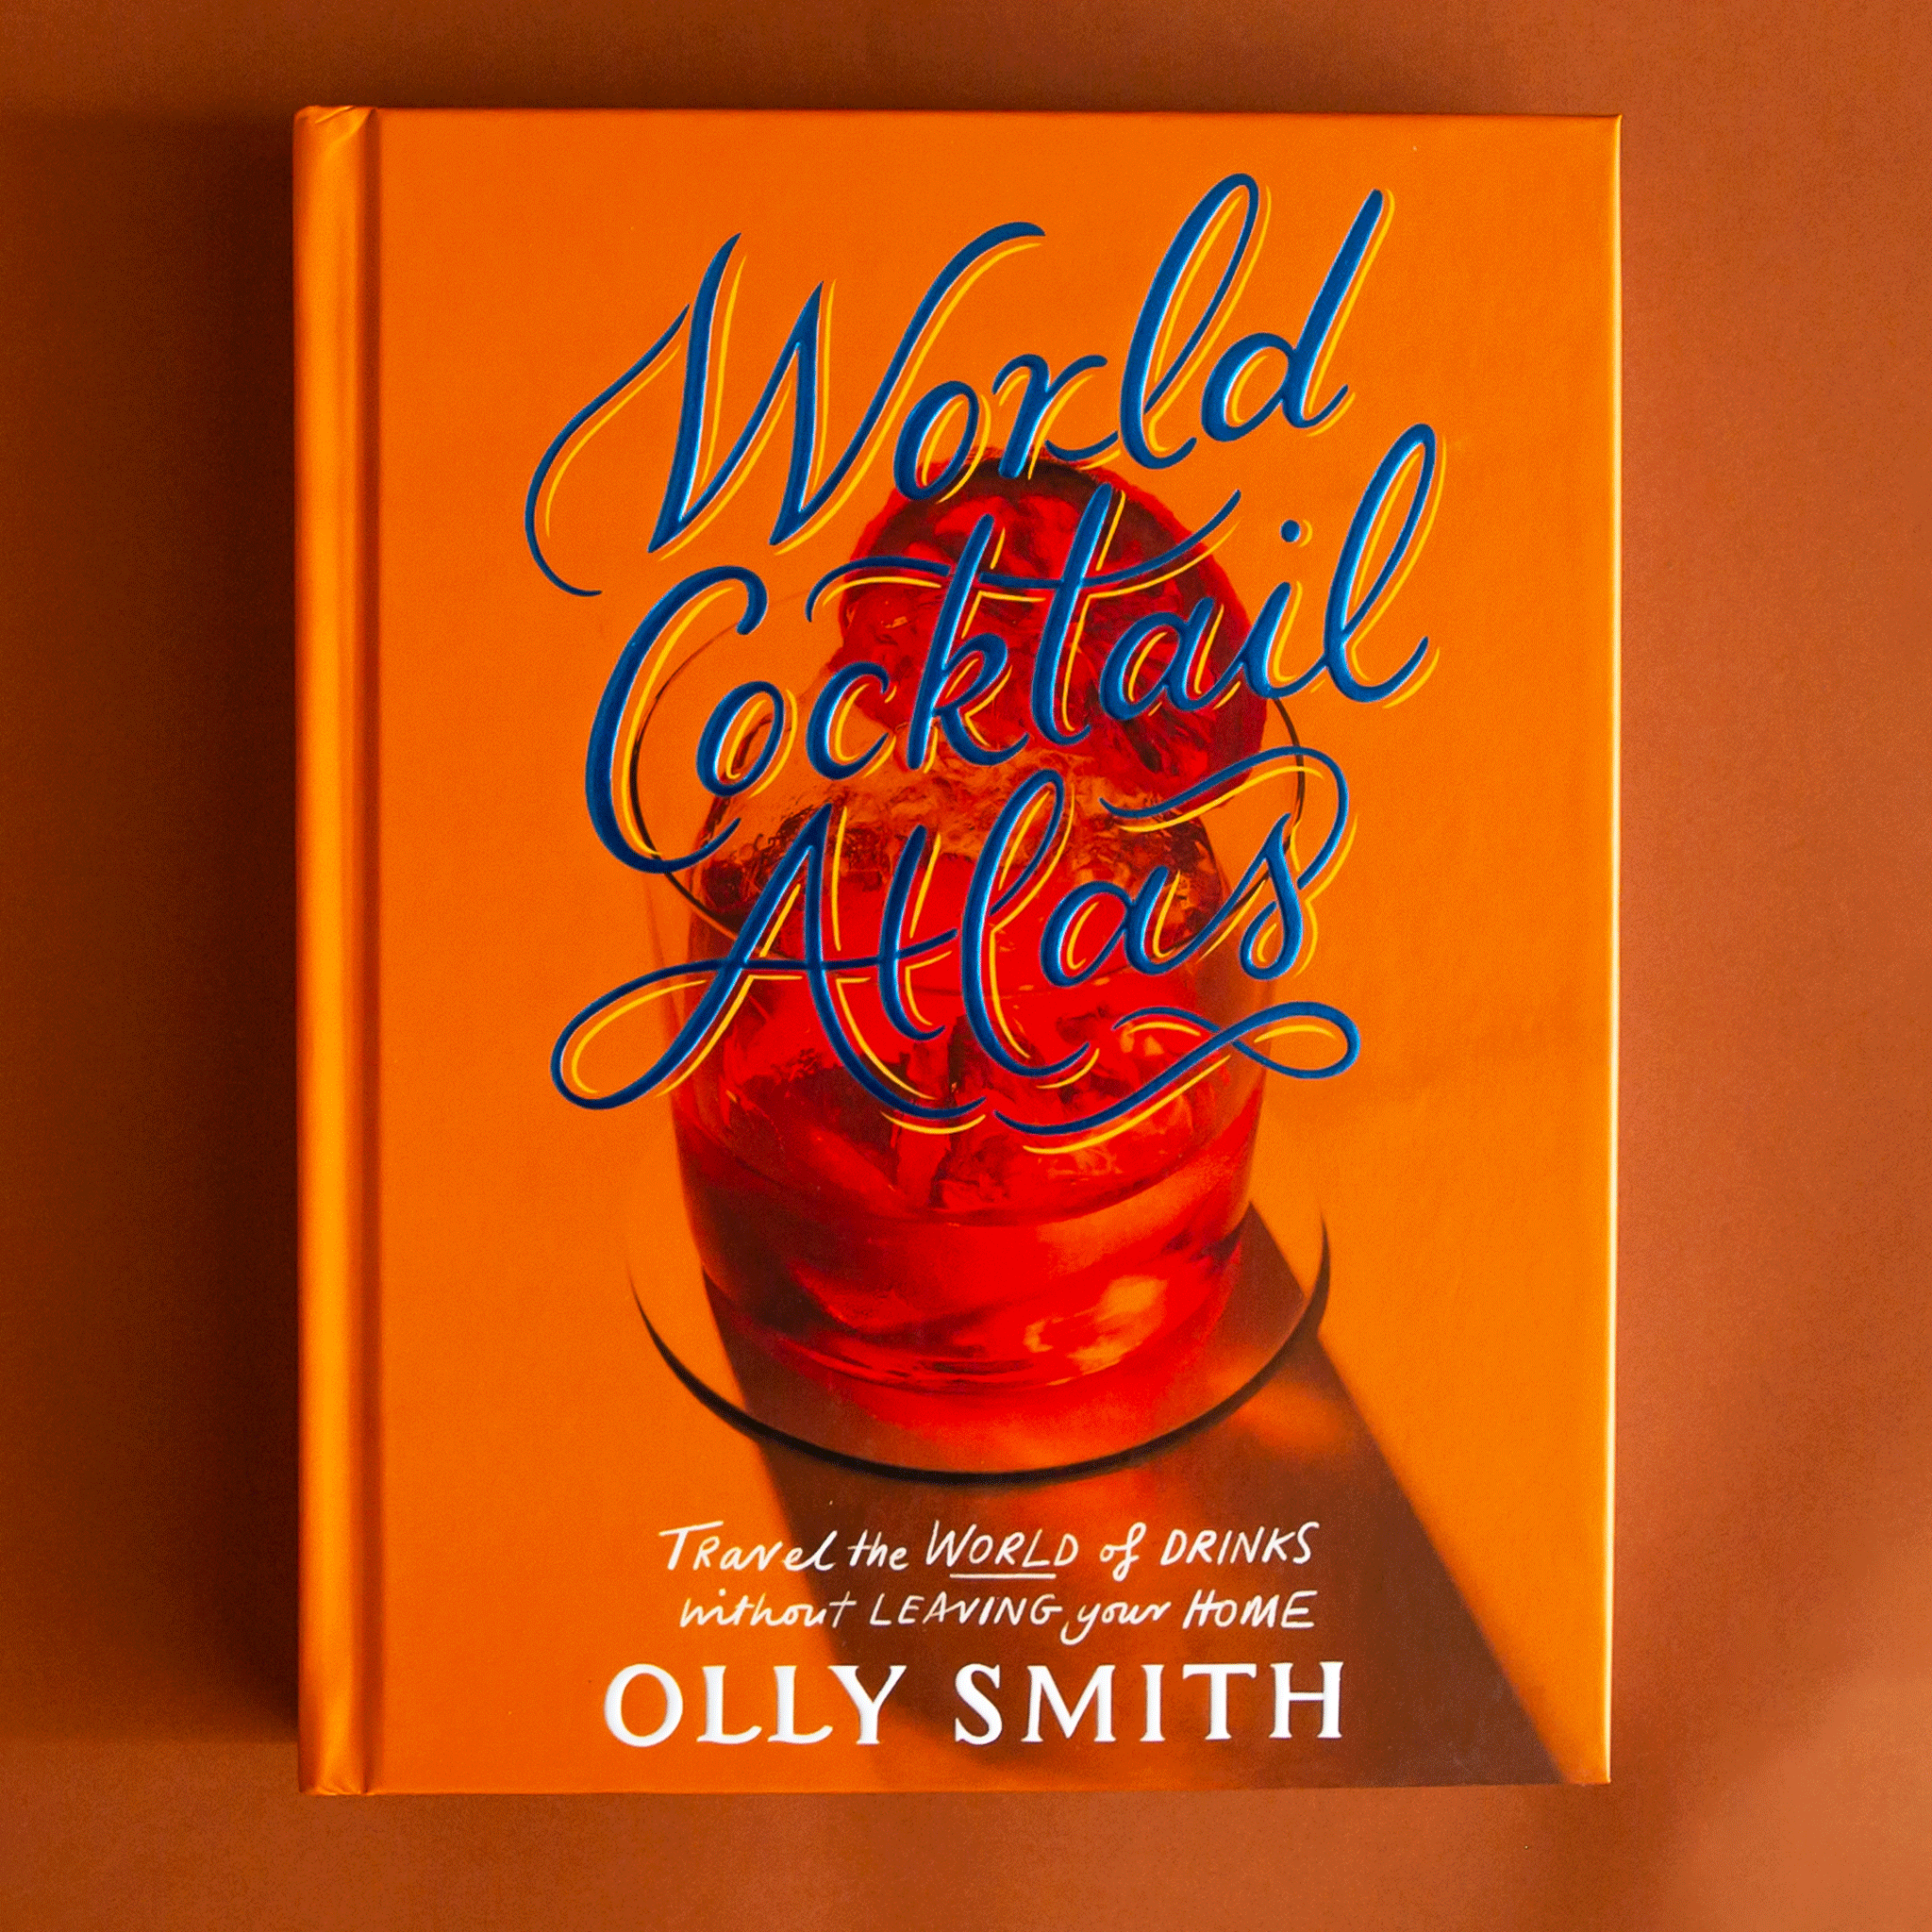 On an orange background is an orange cocktail book with a cocktail glass graphic along with blue text that reads, "World Cocktail Atlas".